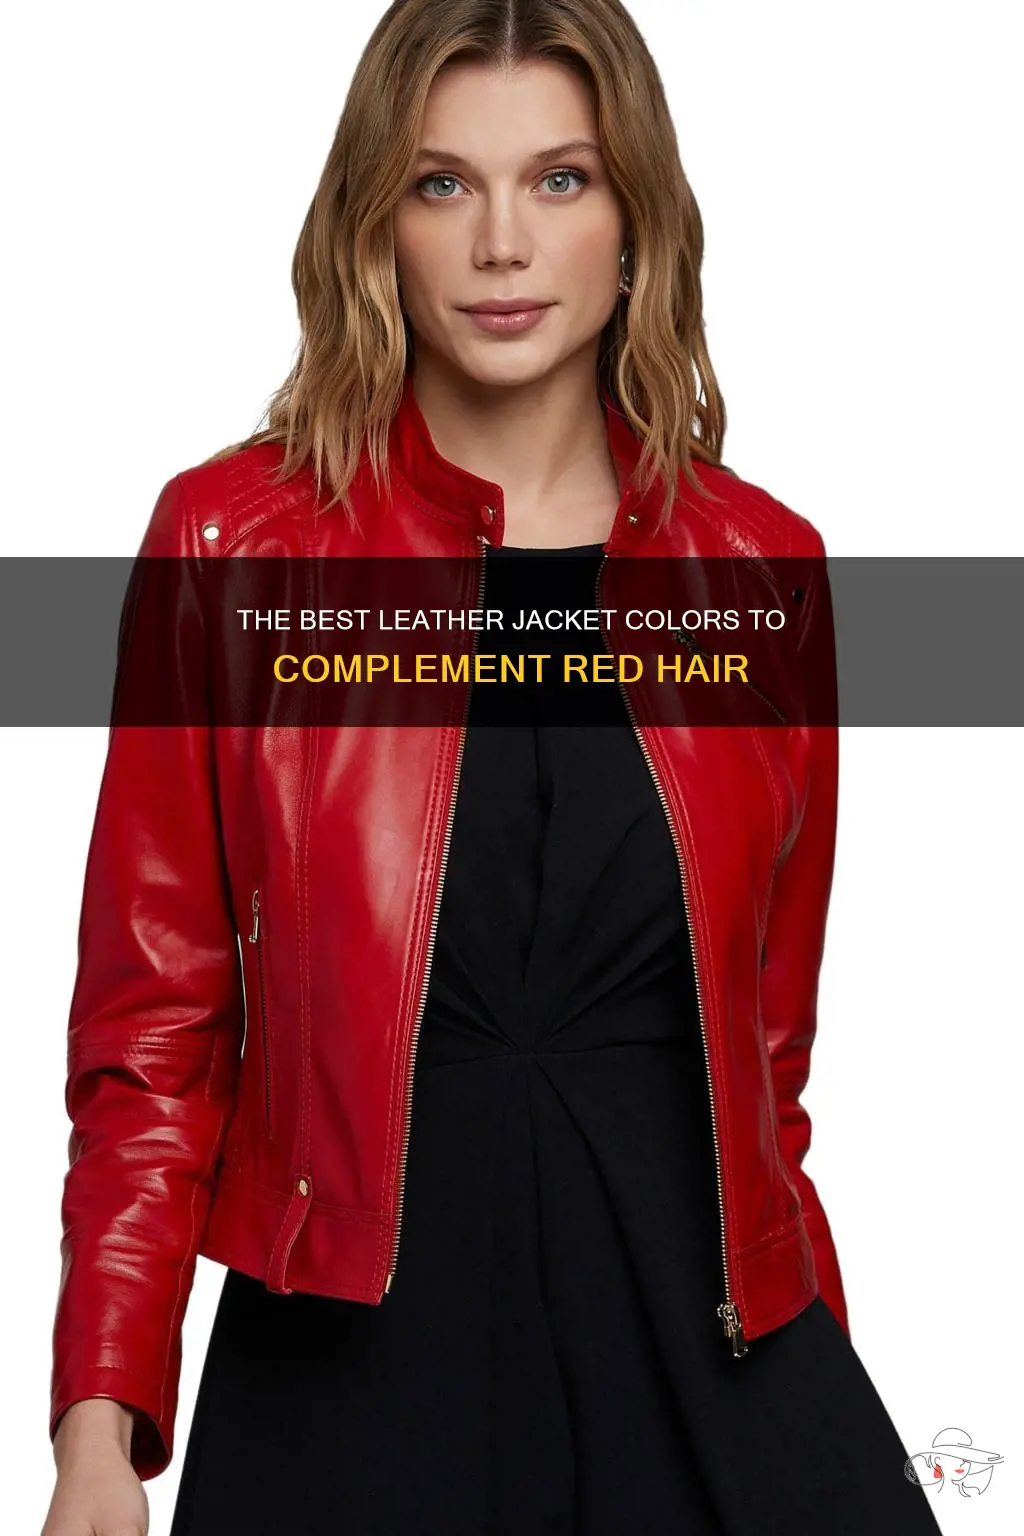 The Best Leather Jacket Colors To Complement Red Hair | ShunVogue